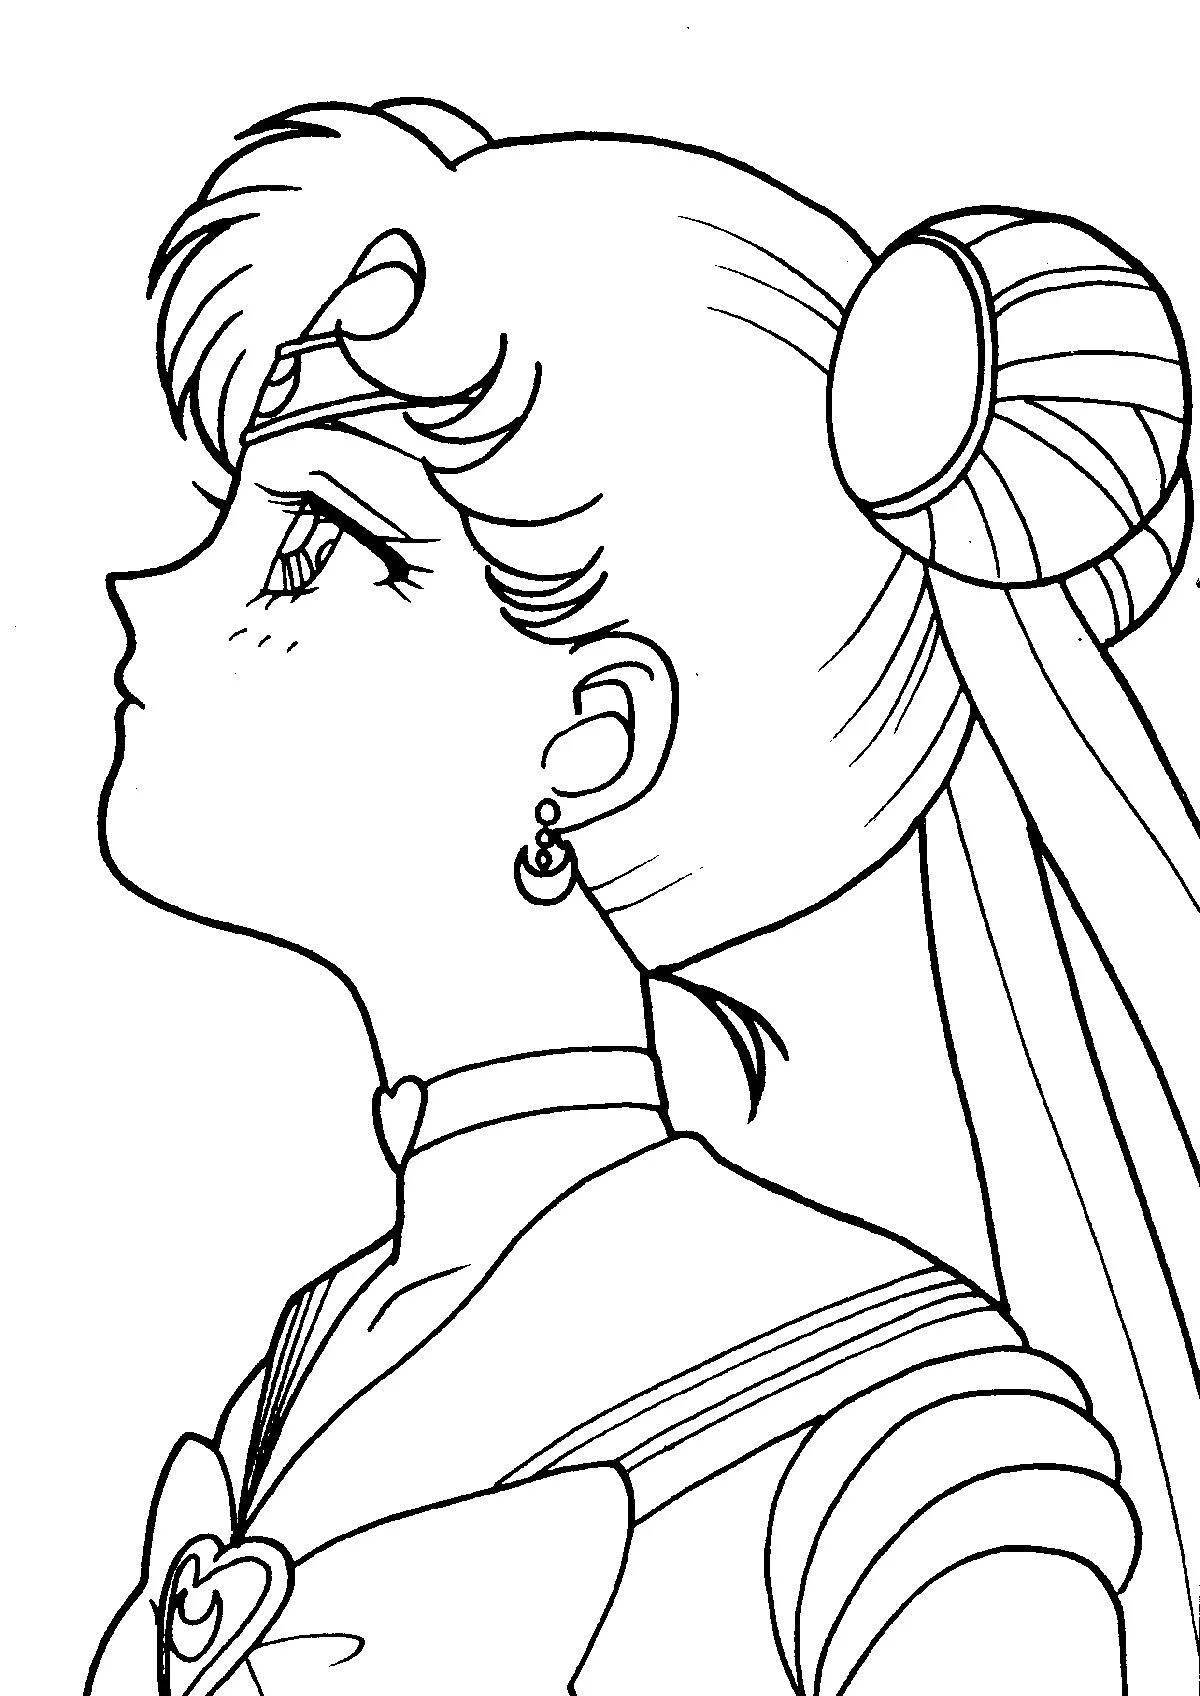 Fashionista cheek battle style coloring page